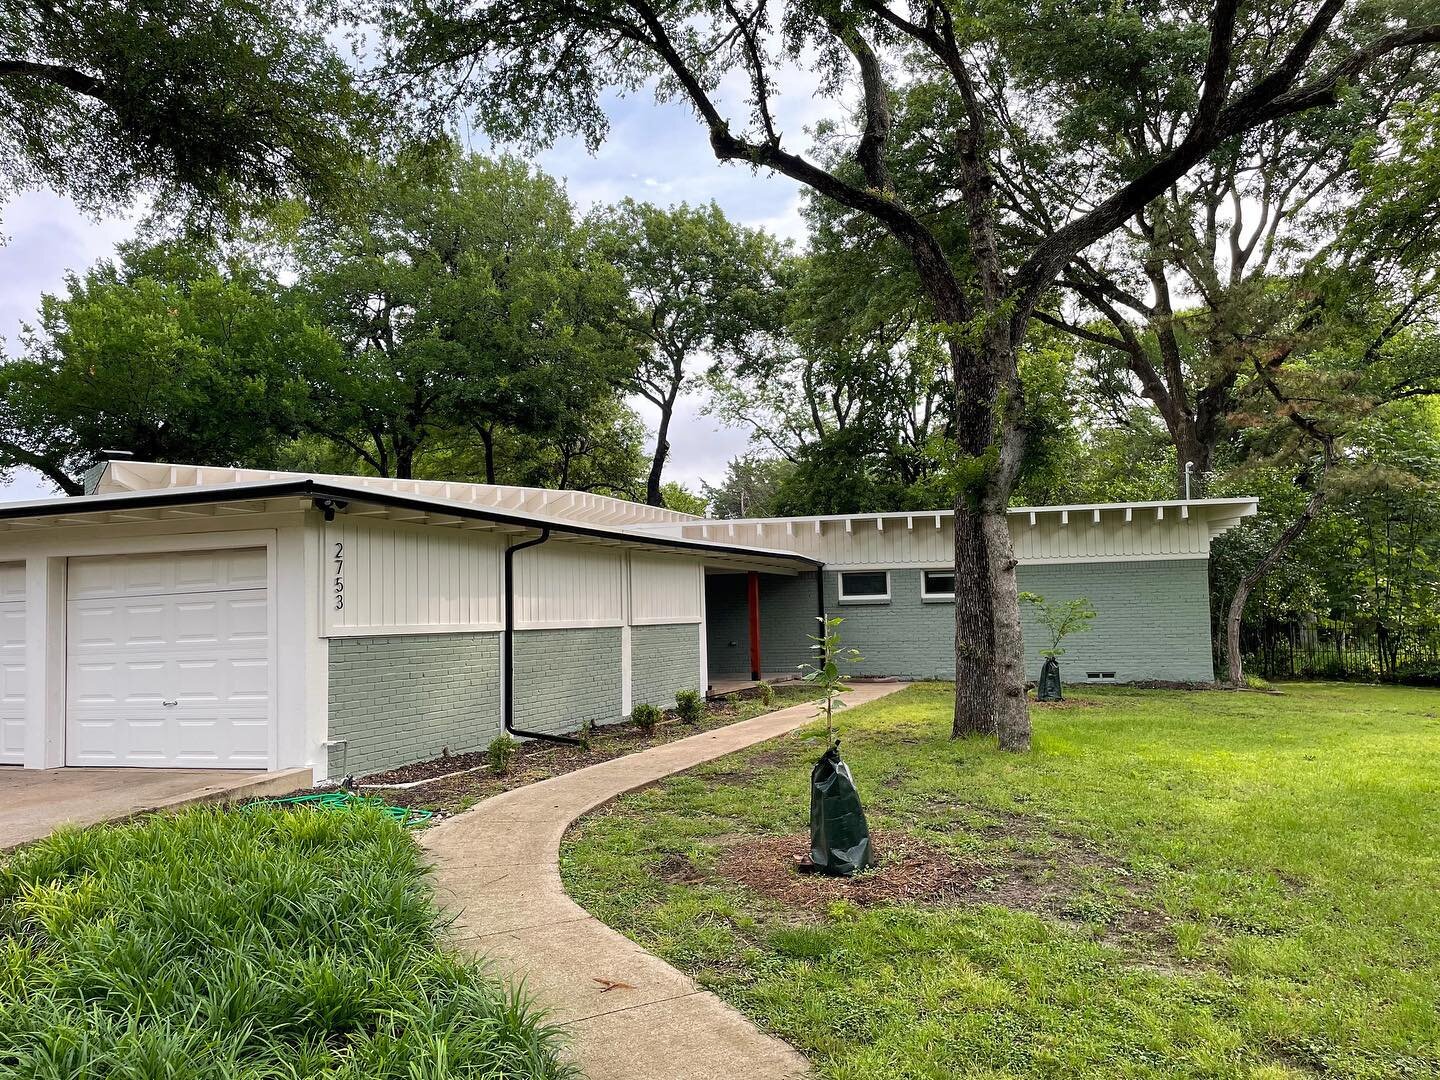 Bringing the outdoors in with Sherwin Williams Evergreen Fog. This soothing shade of green complements the sleek lines and natural textures of this Mid Century Modern home in Dallas, creating a harmonious blend of nature and modern design. #SherwinWi